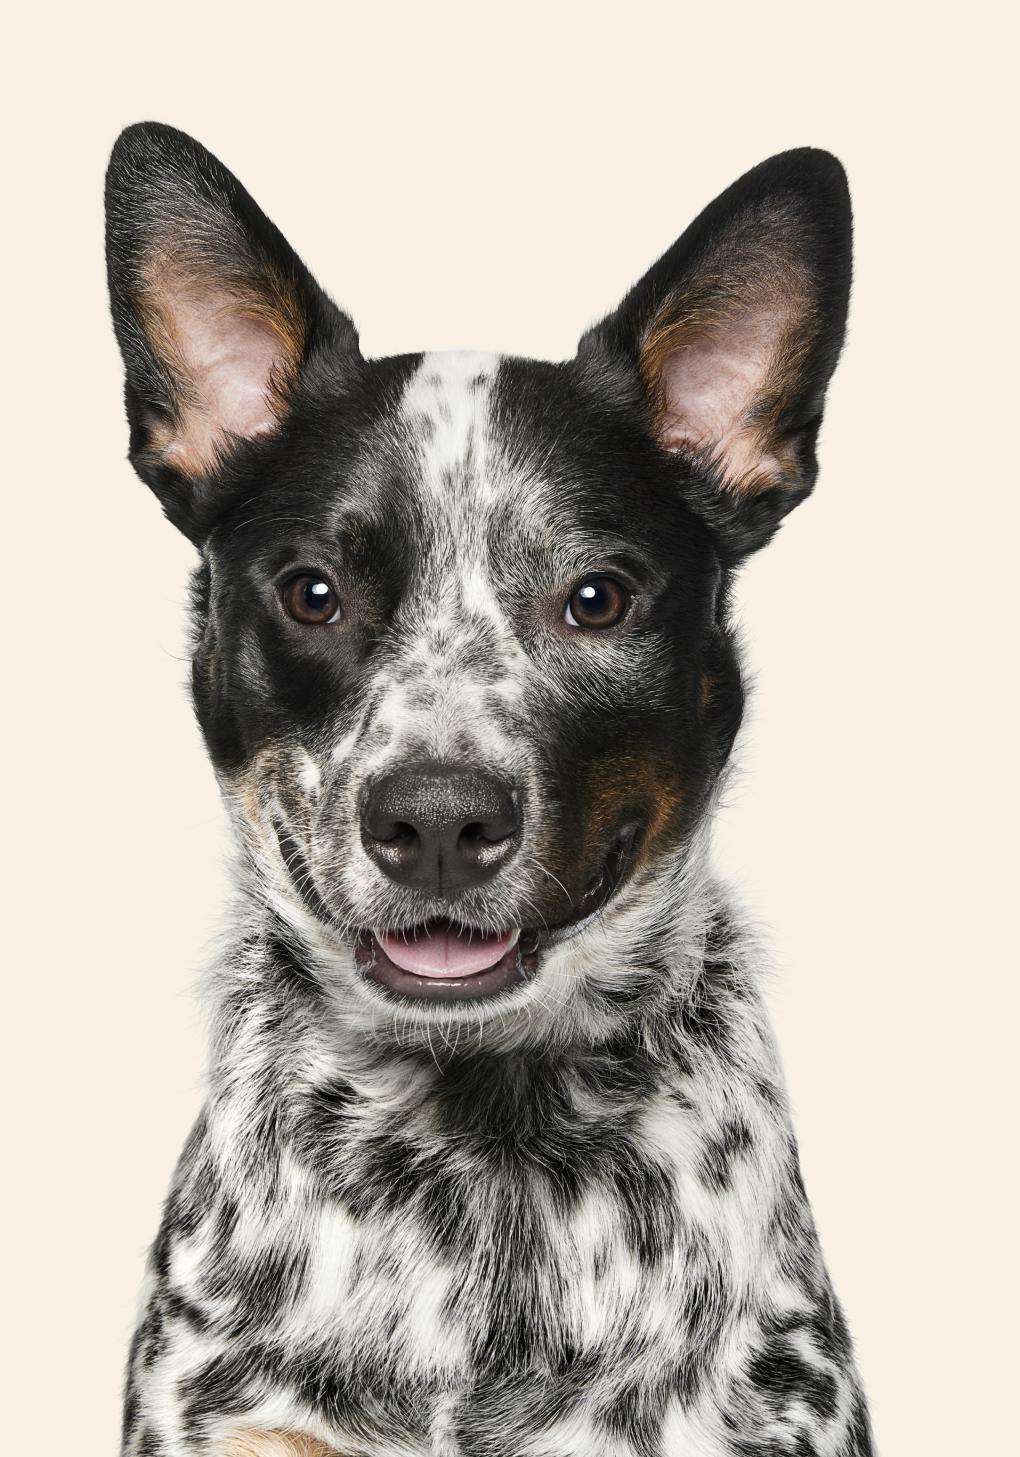 Cattle dog looks at the camera